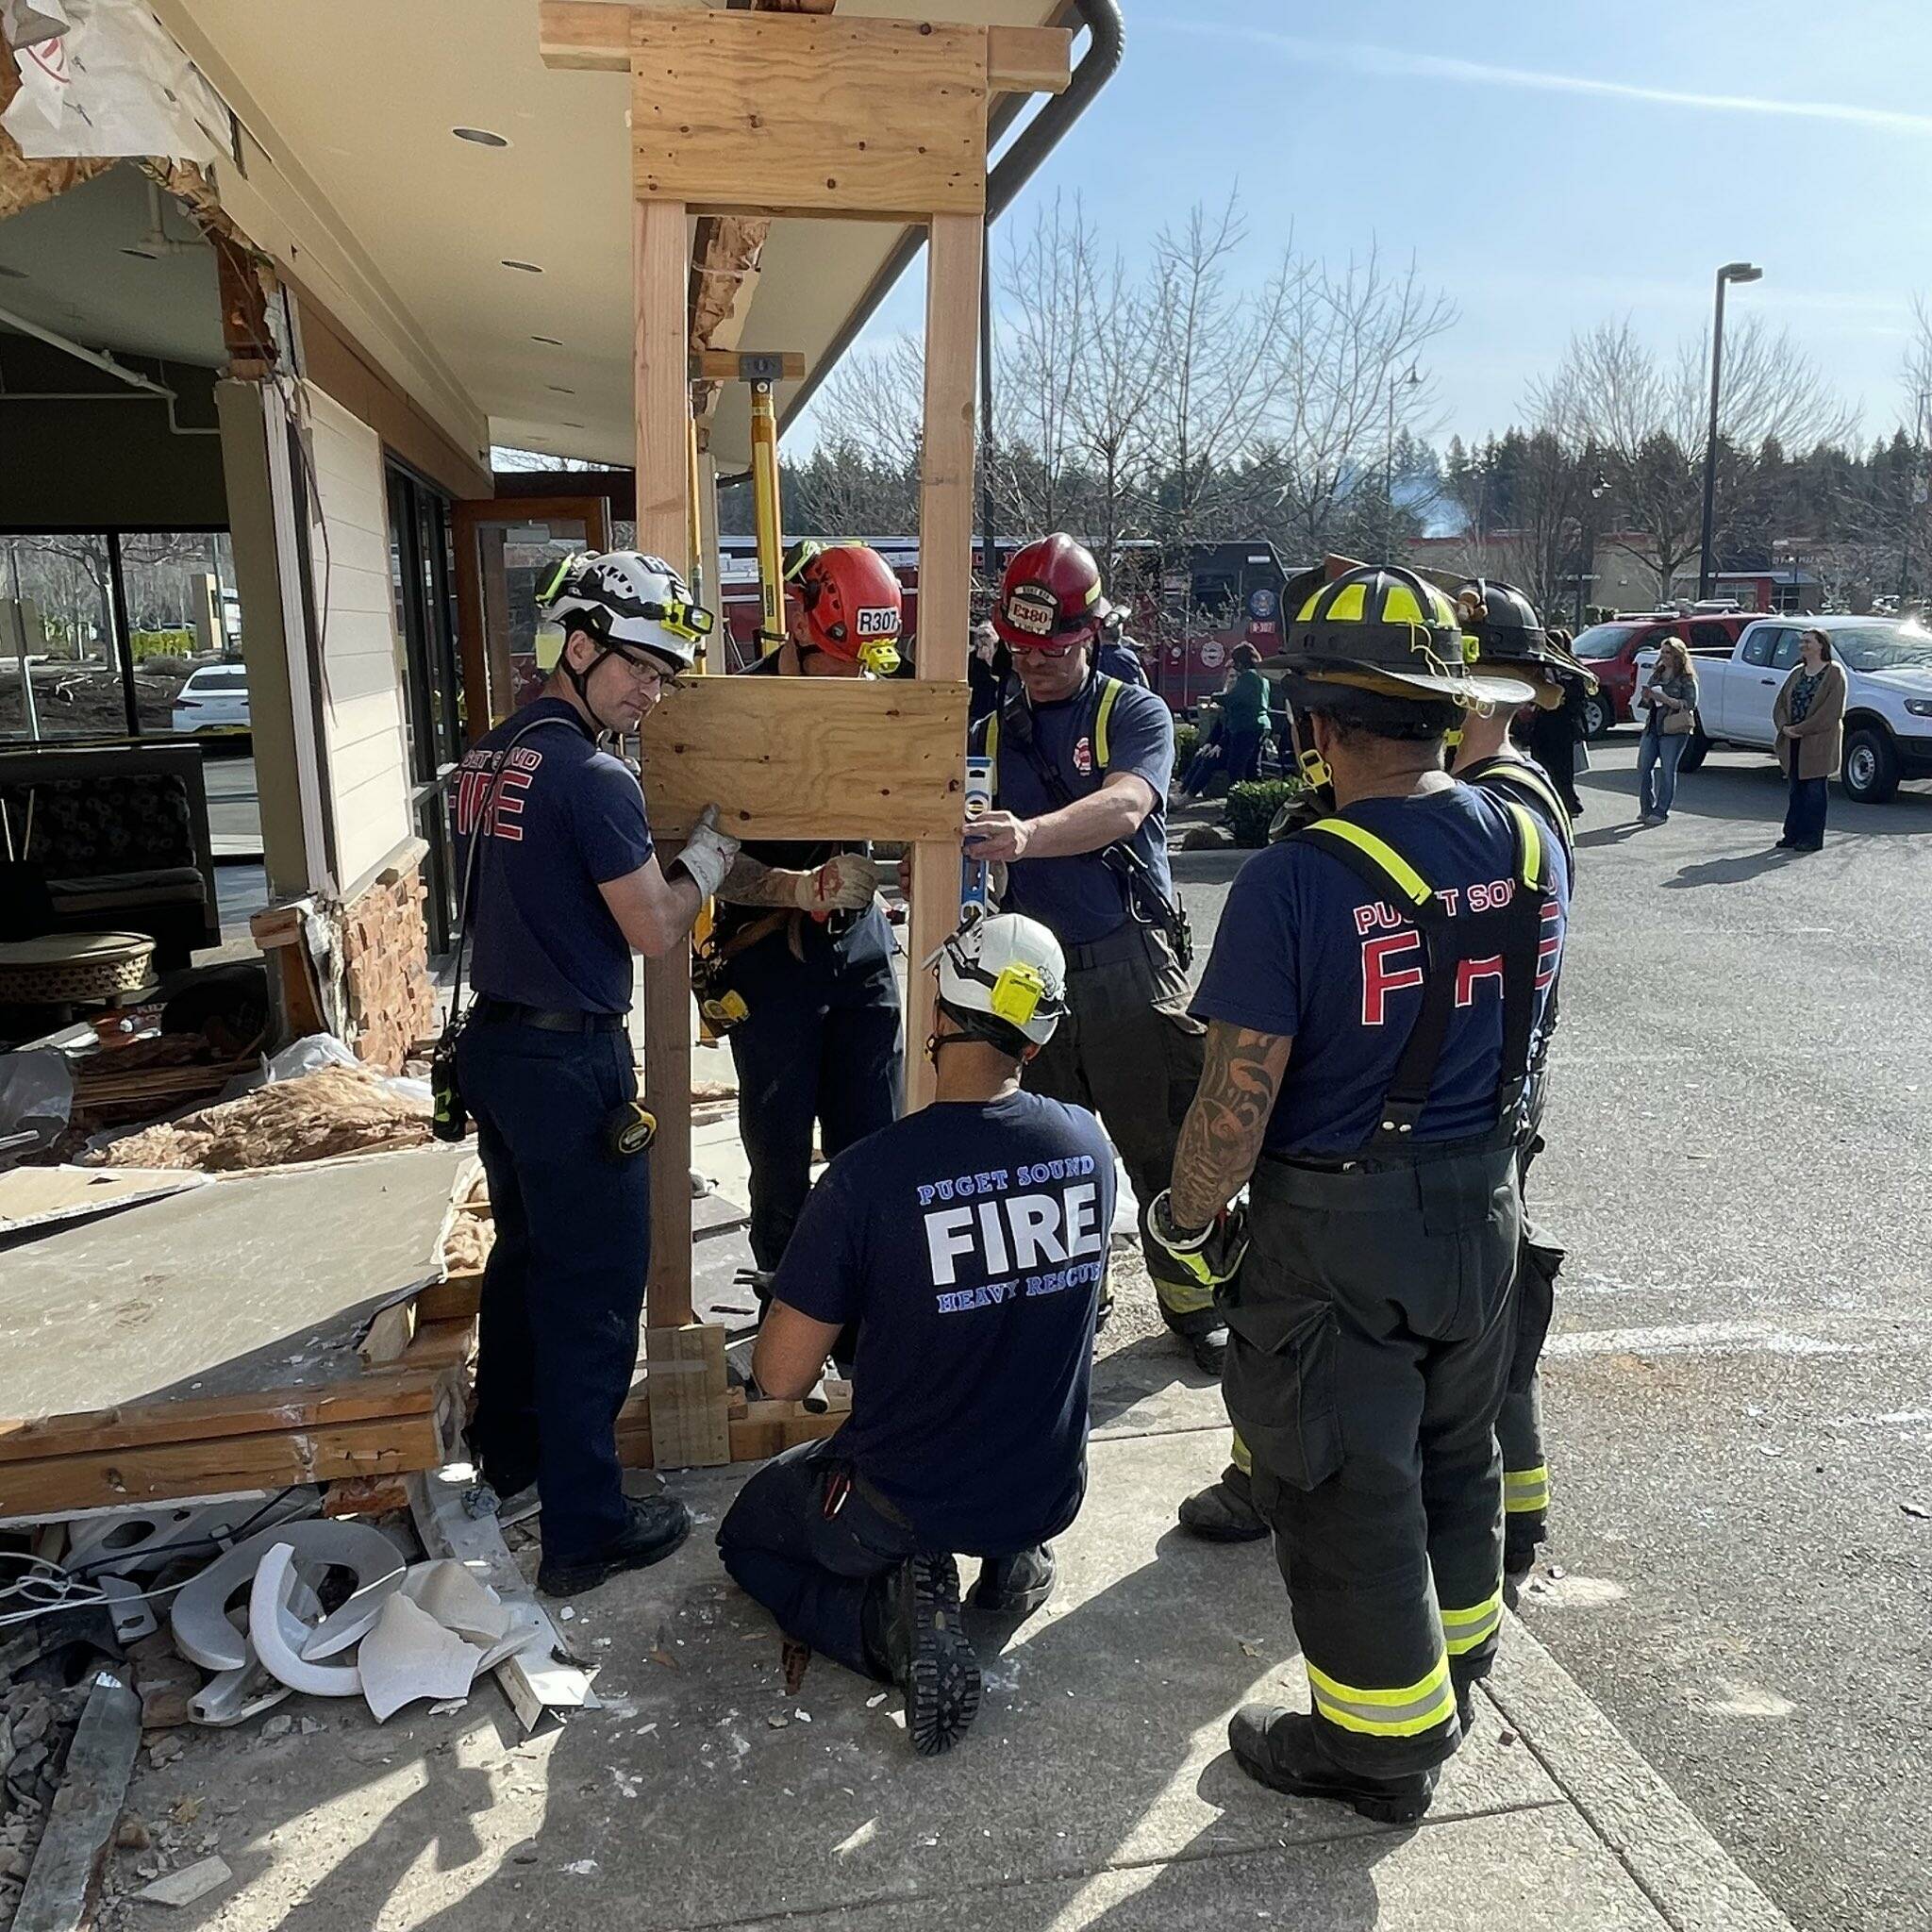 Puget Sound Fire’s Heavy Team added additional emergency shoring to the unstable roofing once the dumptruck was removed. Photo courtesy of Puget Sound Regional Fire Authority.